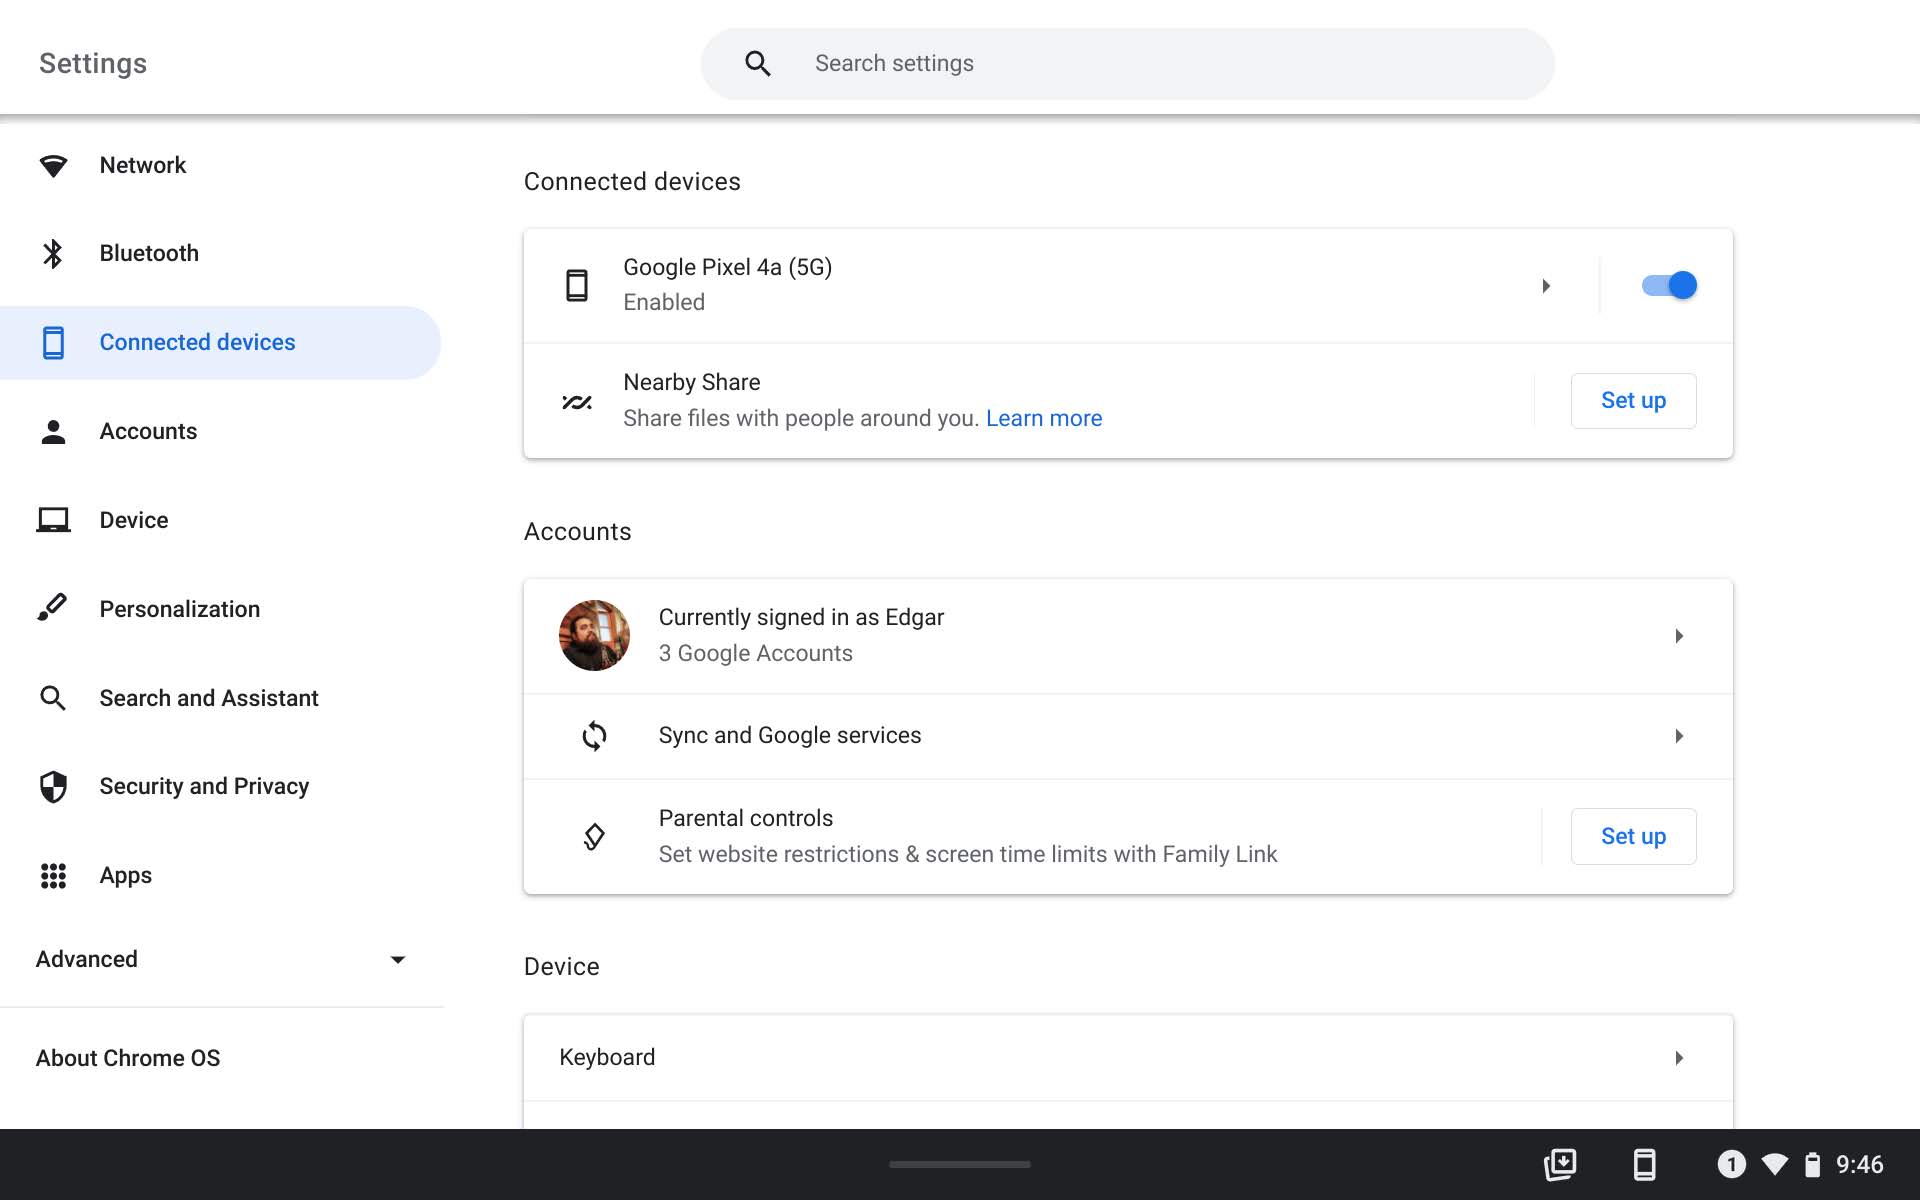 Link Messages on Chrome OS 1